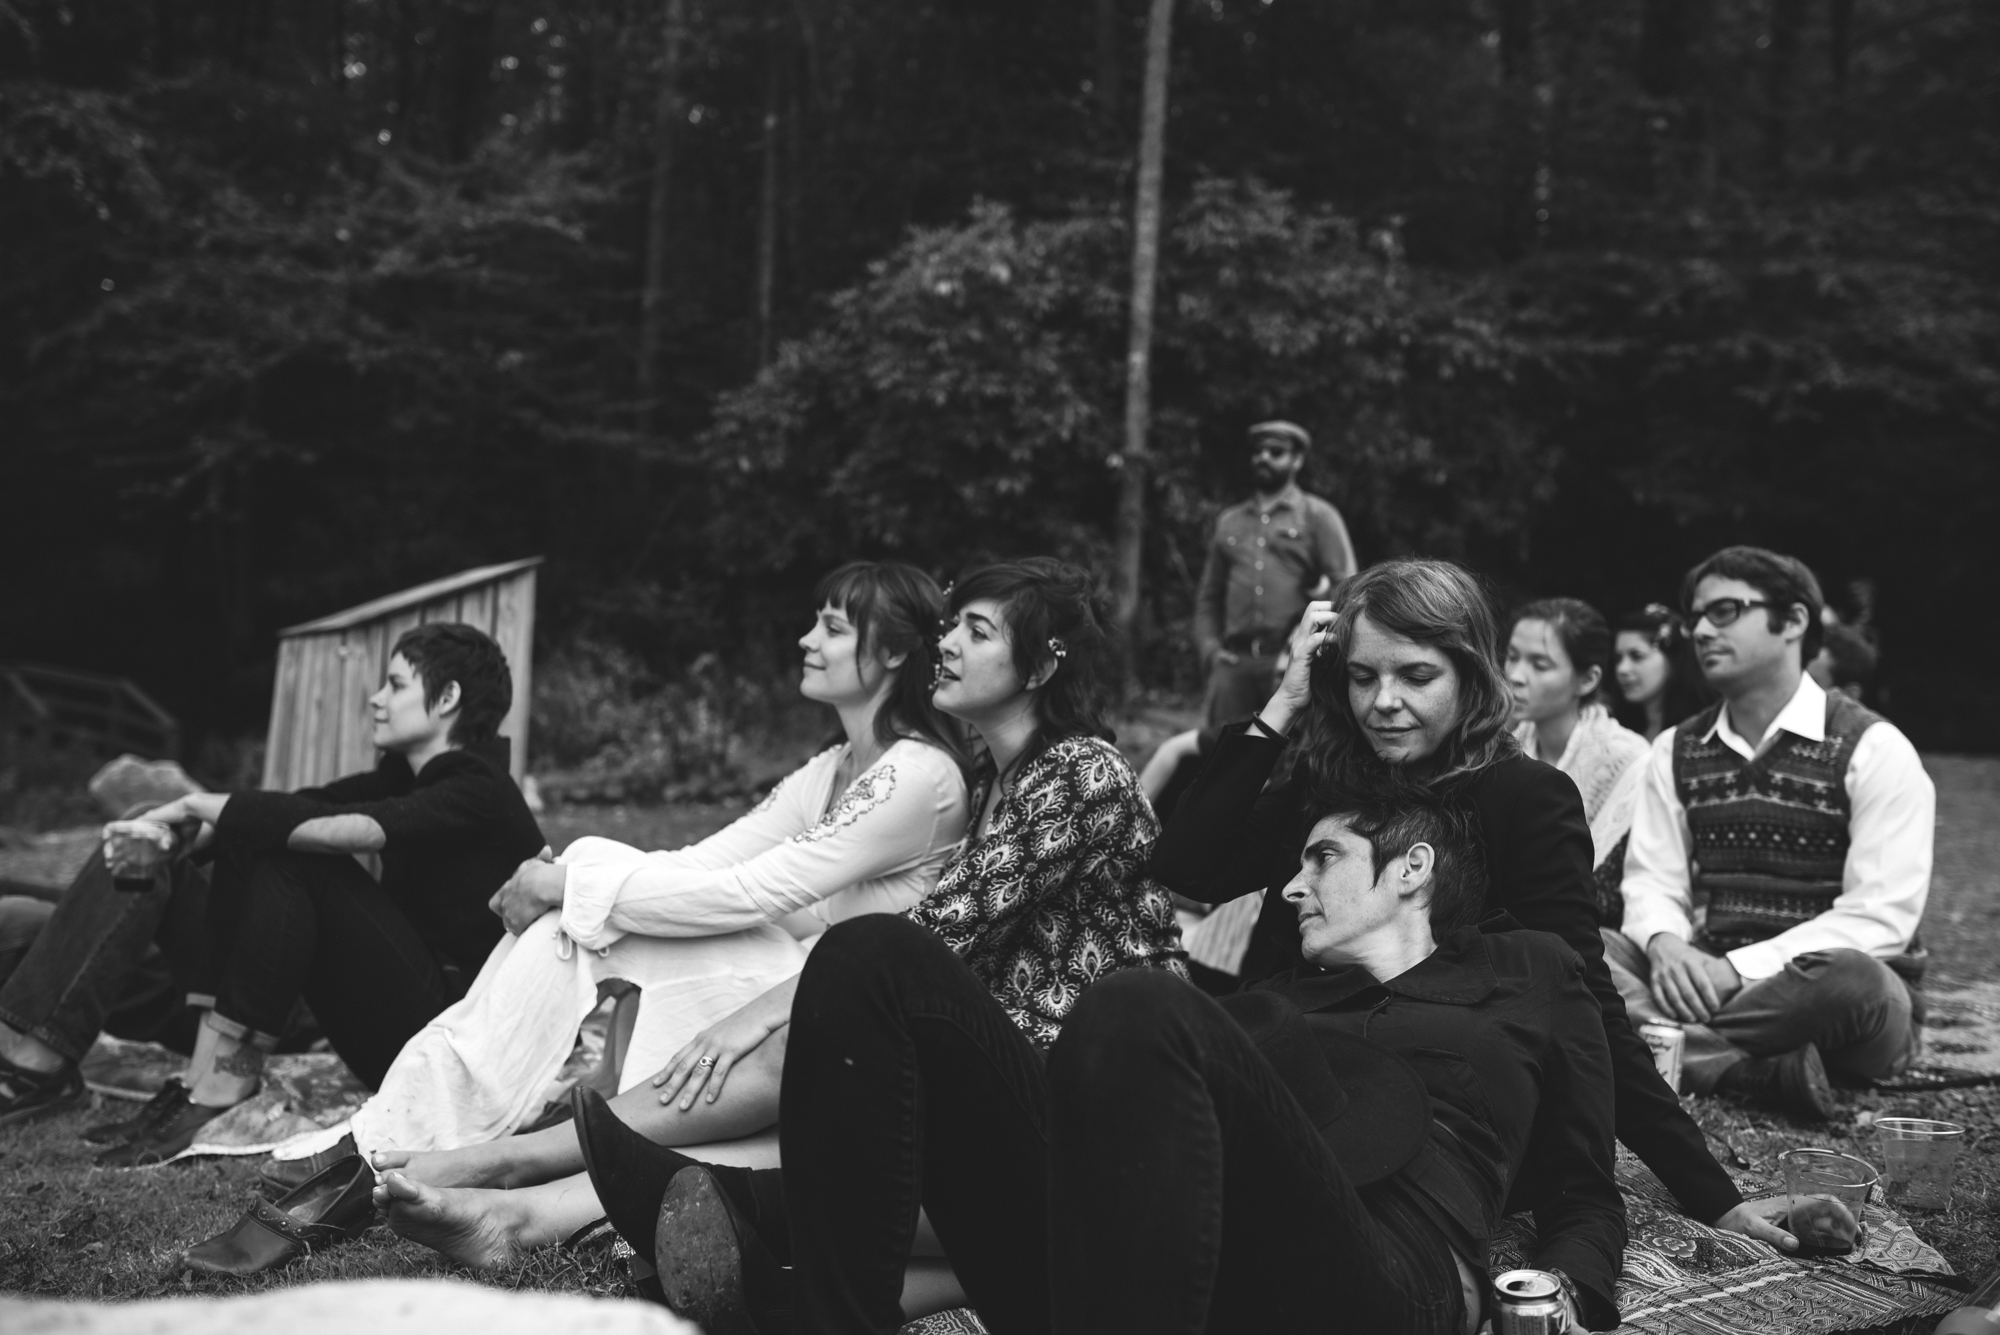  Mountain Wedding, Outdoors, Rustic, West Virginia, Maryland Wedding Photographer, DIY, Casual, black and white photo of bride and friends sitting in grass outside 